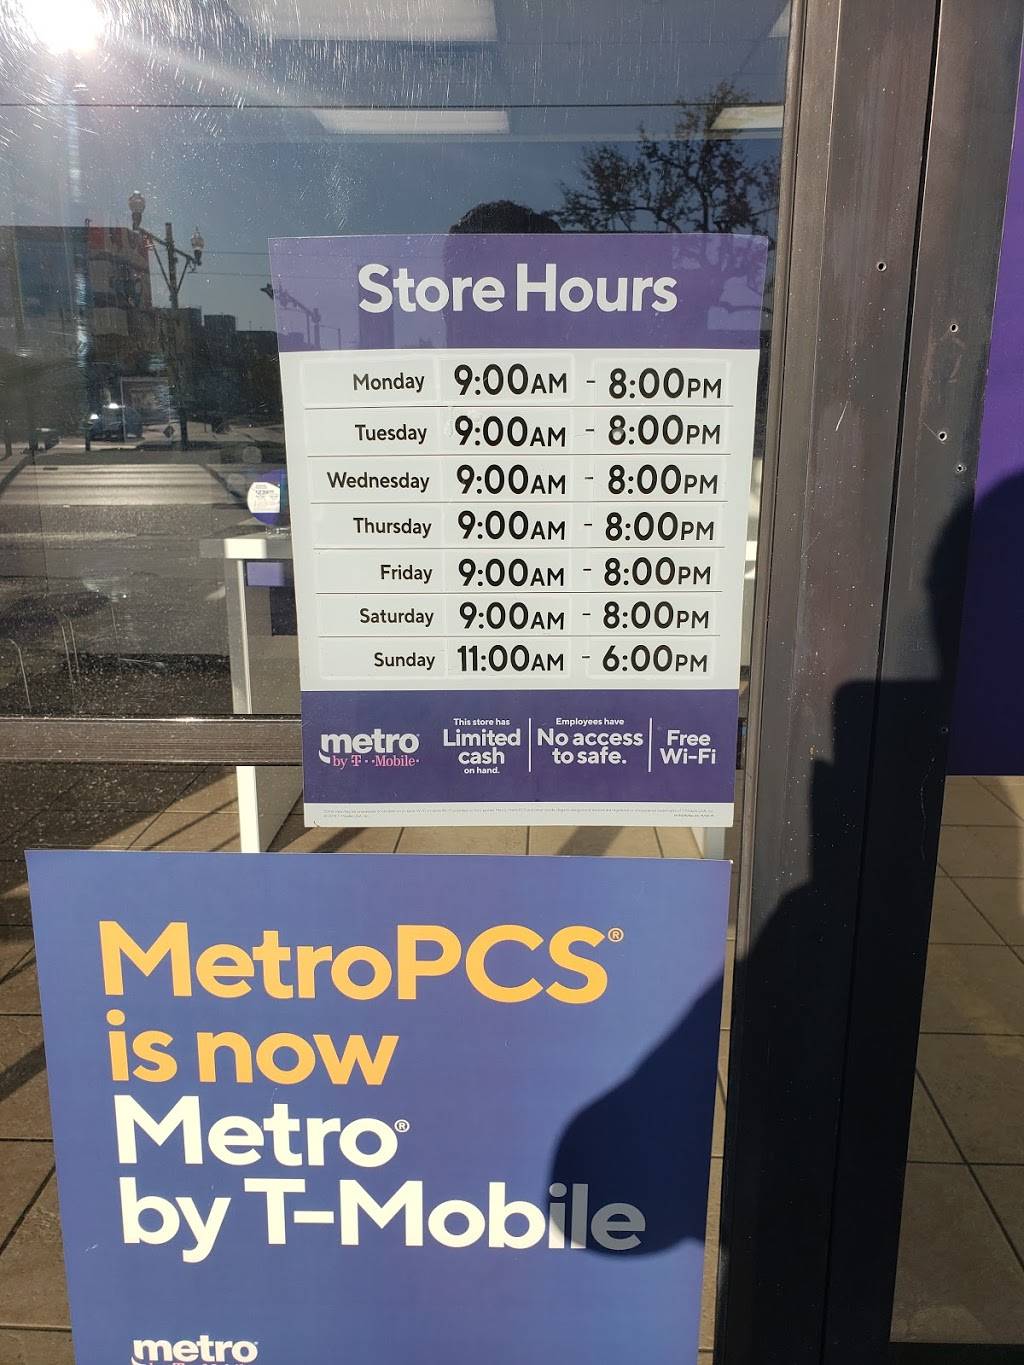 Metro by T-Mobile | 2131 Canal St Ste 2, New Orleans, LA 70112 | Phone: (504) 588-2919